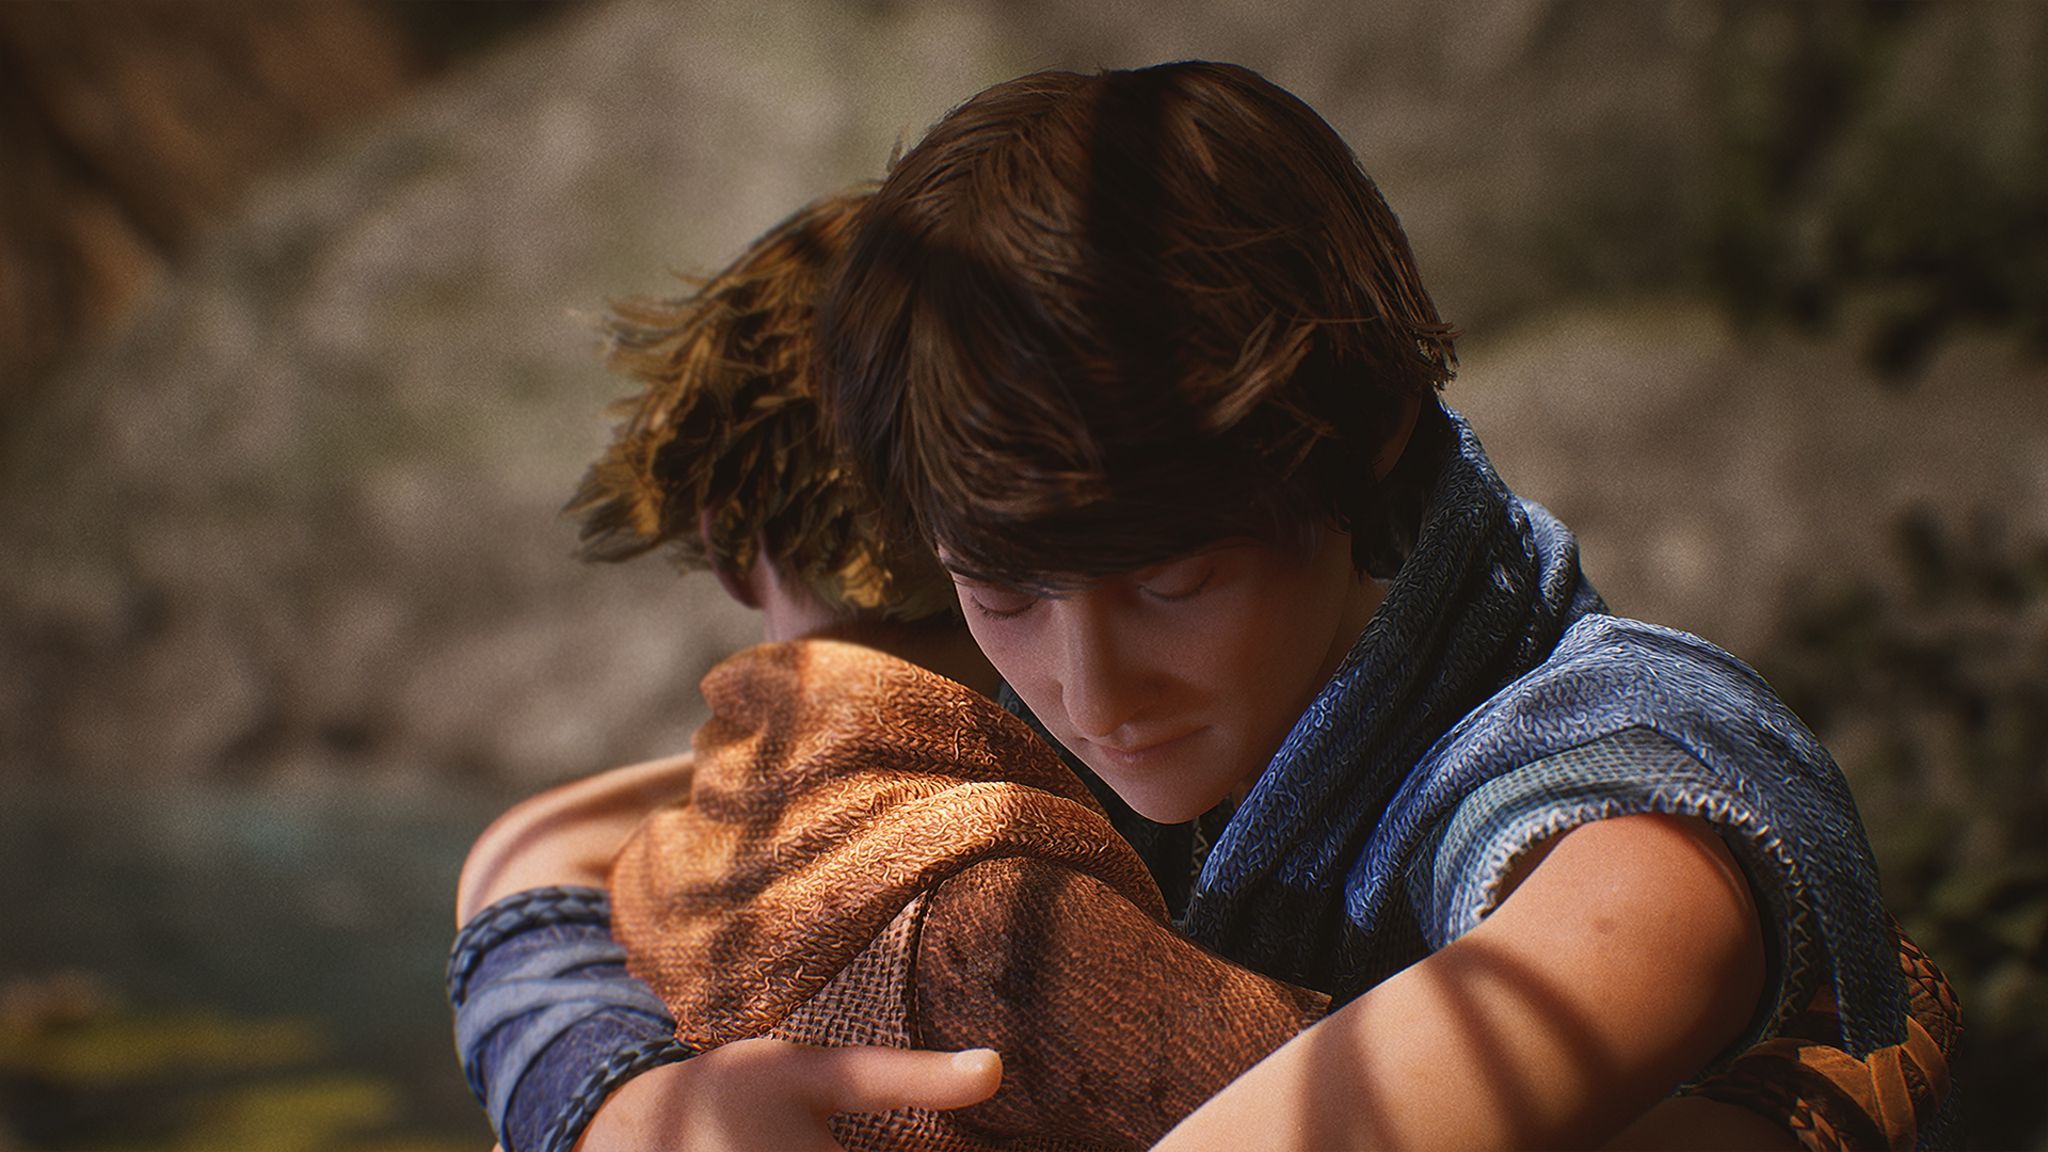 A teenage boy with black hair hugs a younger blonde boy in a computer-generated image. They both wear old-world clothes which appear to be made from a sack-like material, denoting a fantasy setting. The older boy's eyes are closed and the embrace looks tender.